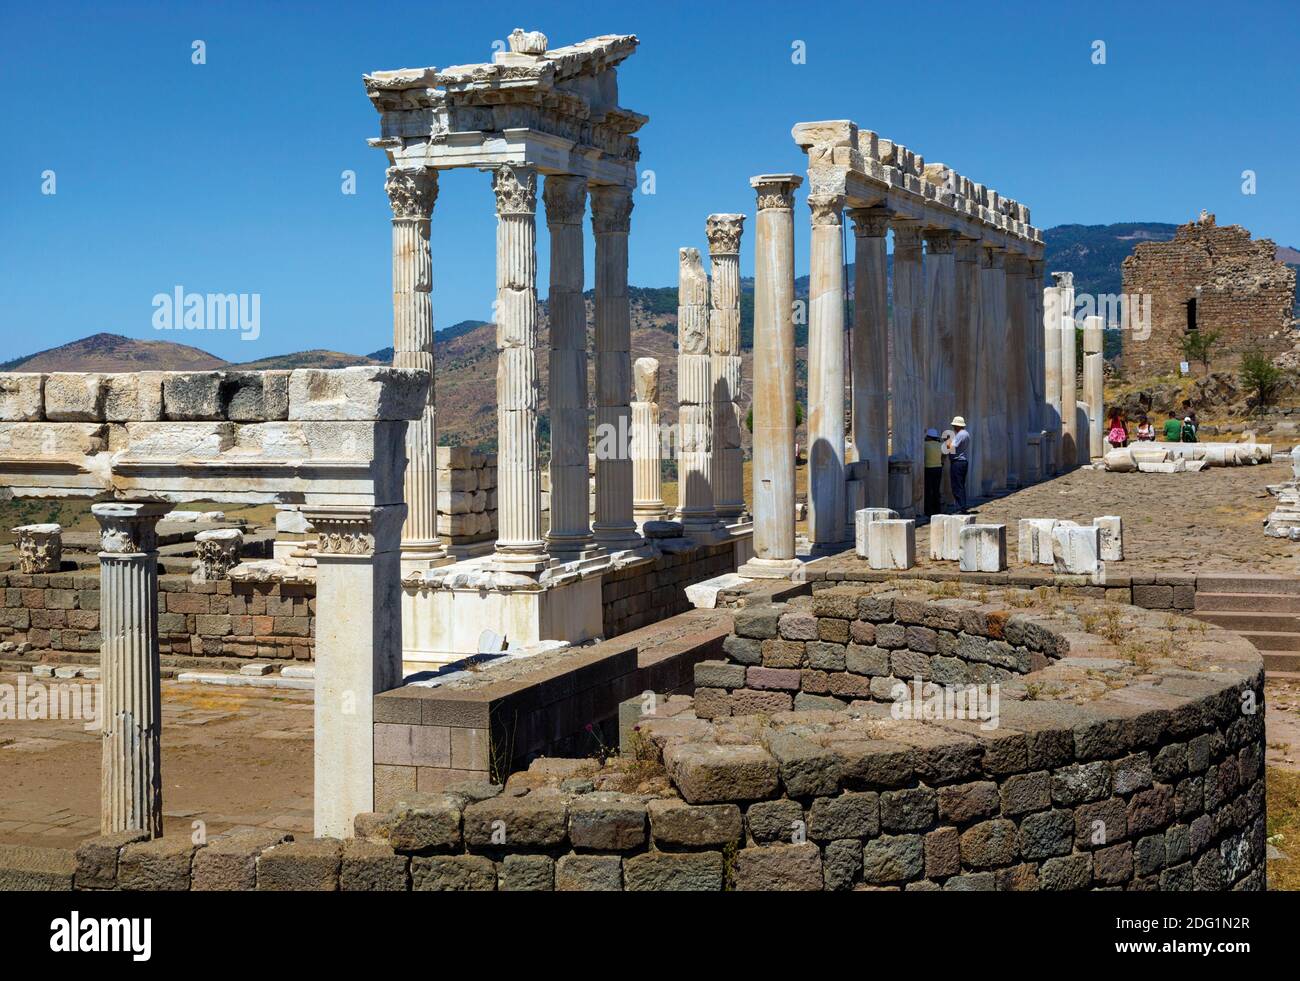 Ruins of ancient Pergamum above Bergama, Izmir Province, Turkey. The Temple of Trajan, completed in the 2nd century AD. The ruins are a UNESCO World H Stock Photo